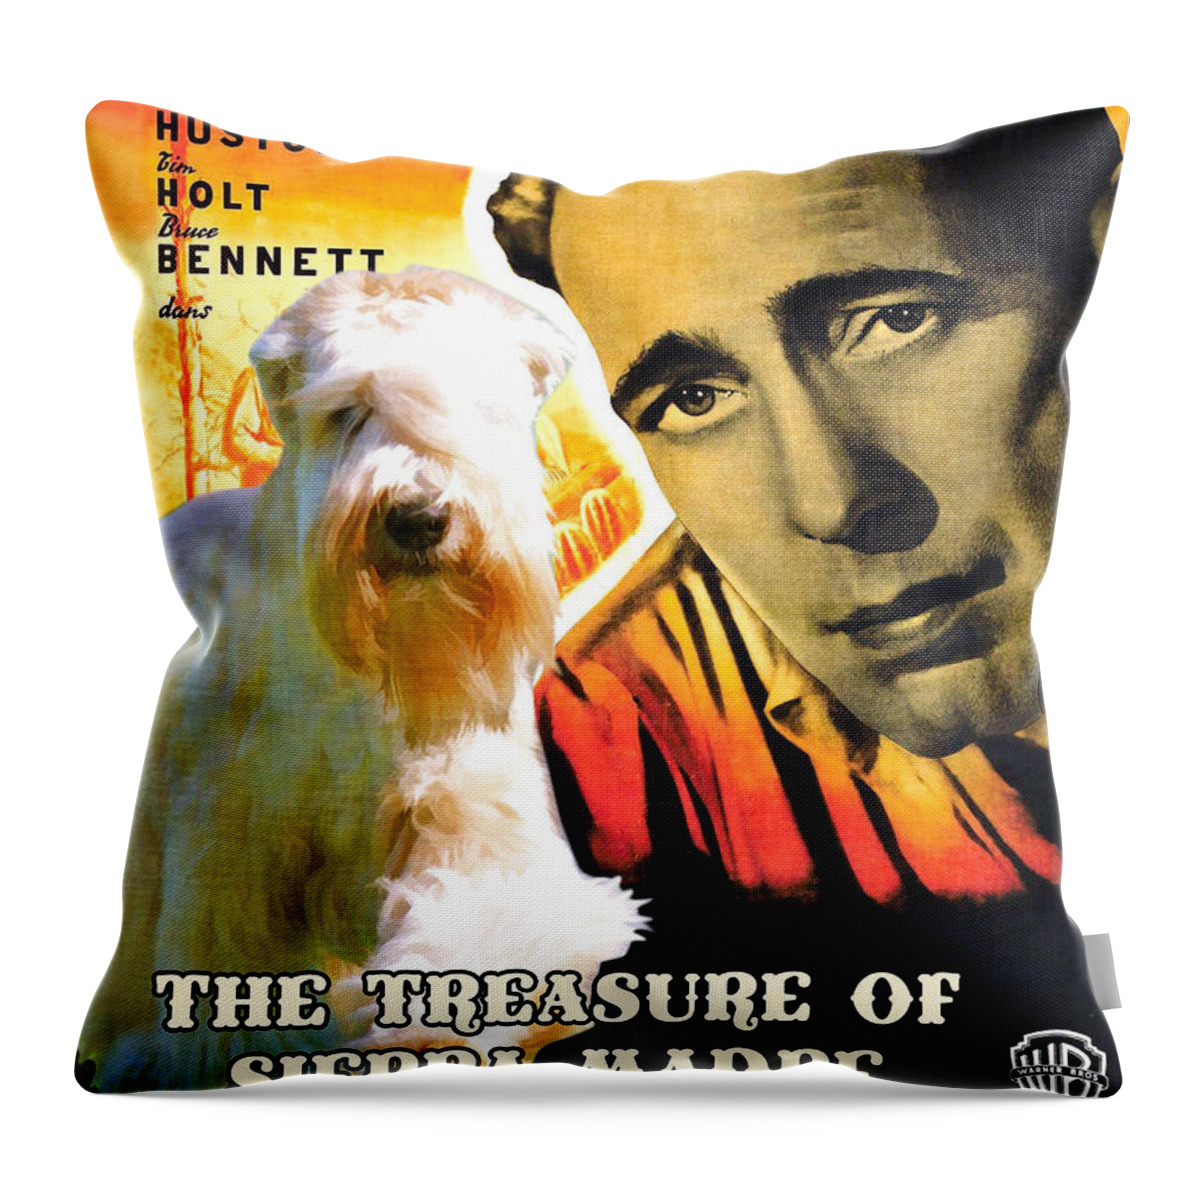 Soft-coated Wheaten Terrier Throw Pillow featuring the painting Soft-coated Wheaten Terrier - Wheaten Terrier Art Canvas Print - The Treasure of the Sierra Madre M by Sandra Sij